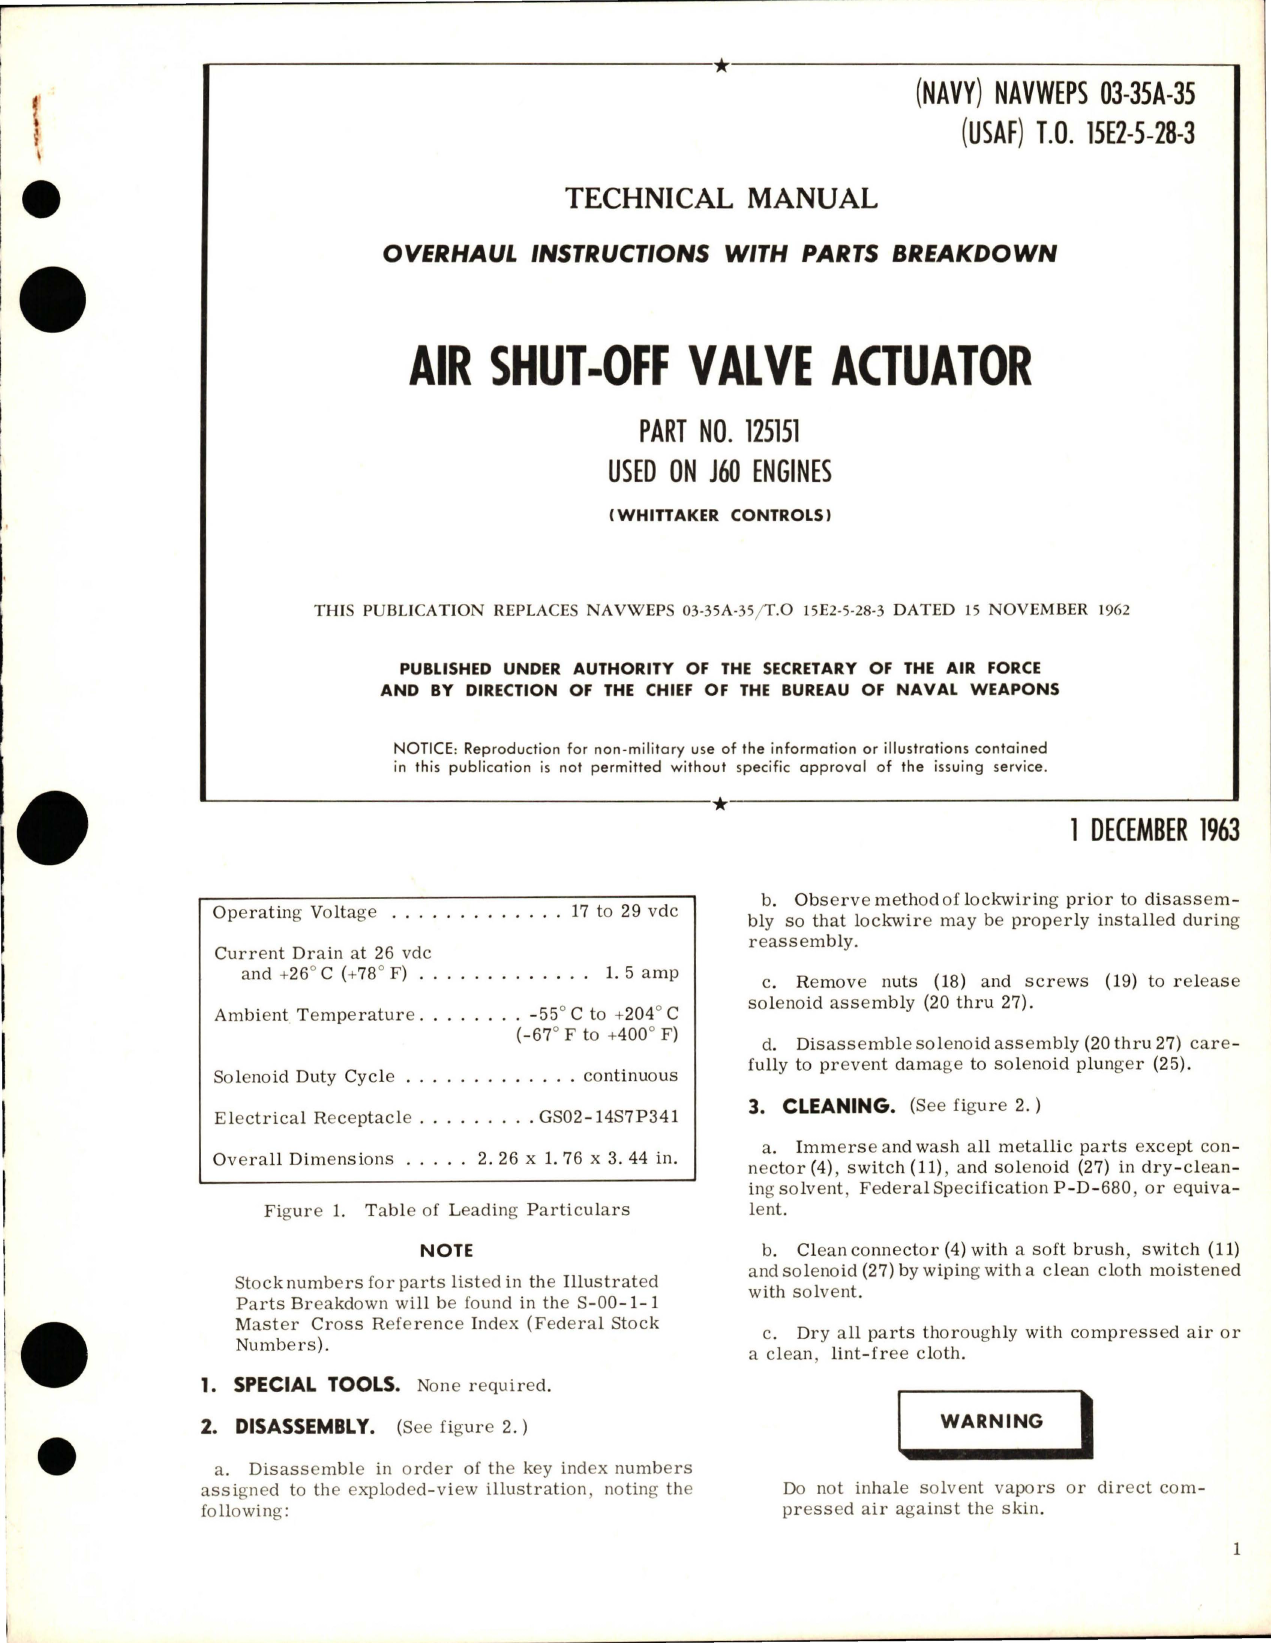 Sample page 1 from AirCorps Library document: Overhaul Instructions with Parts Breakdown for Air Shut-Off Valve Actuator - Part 125151